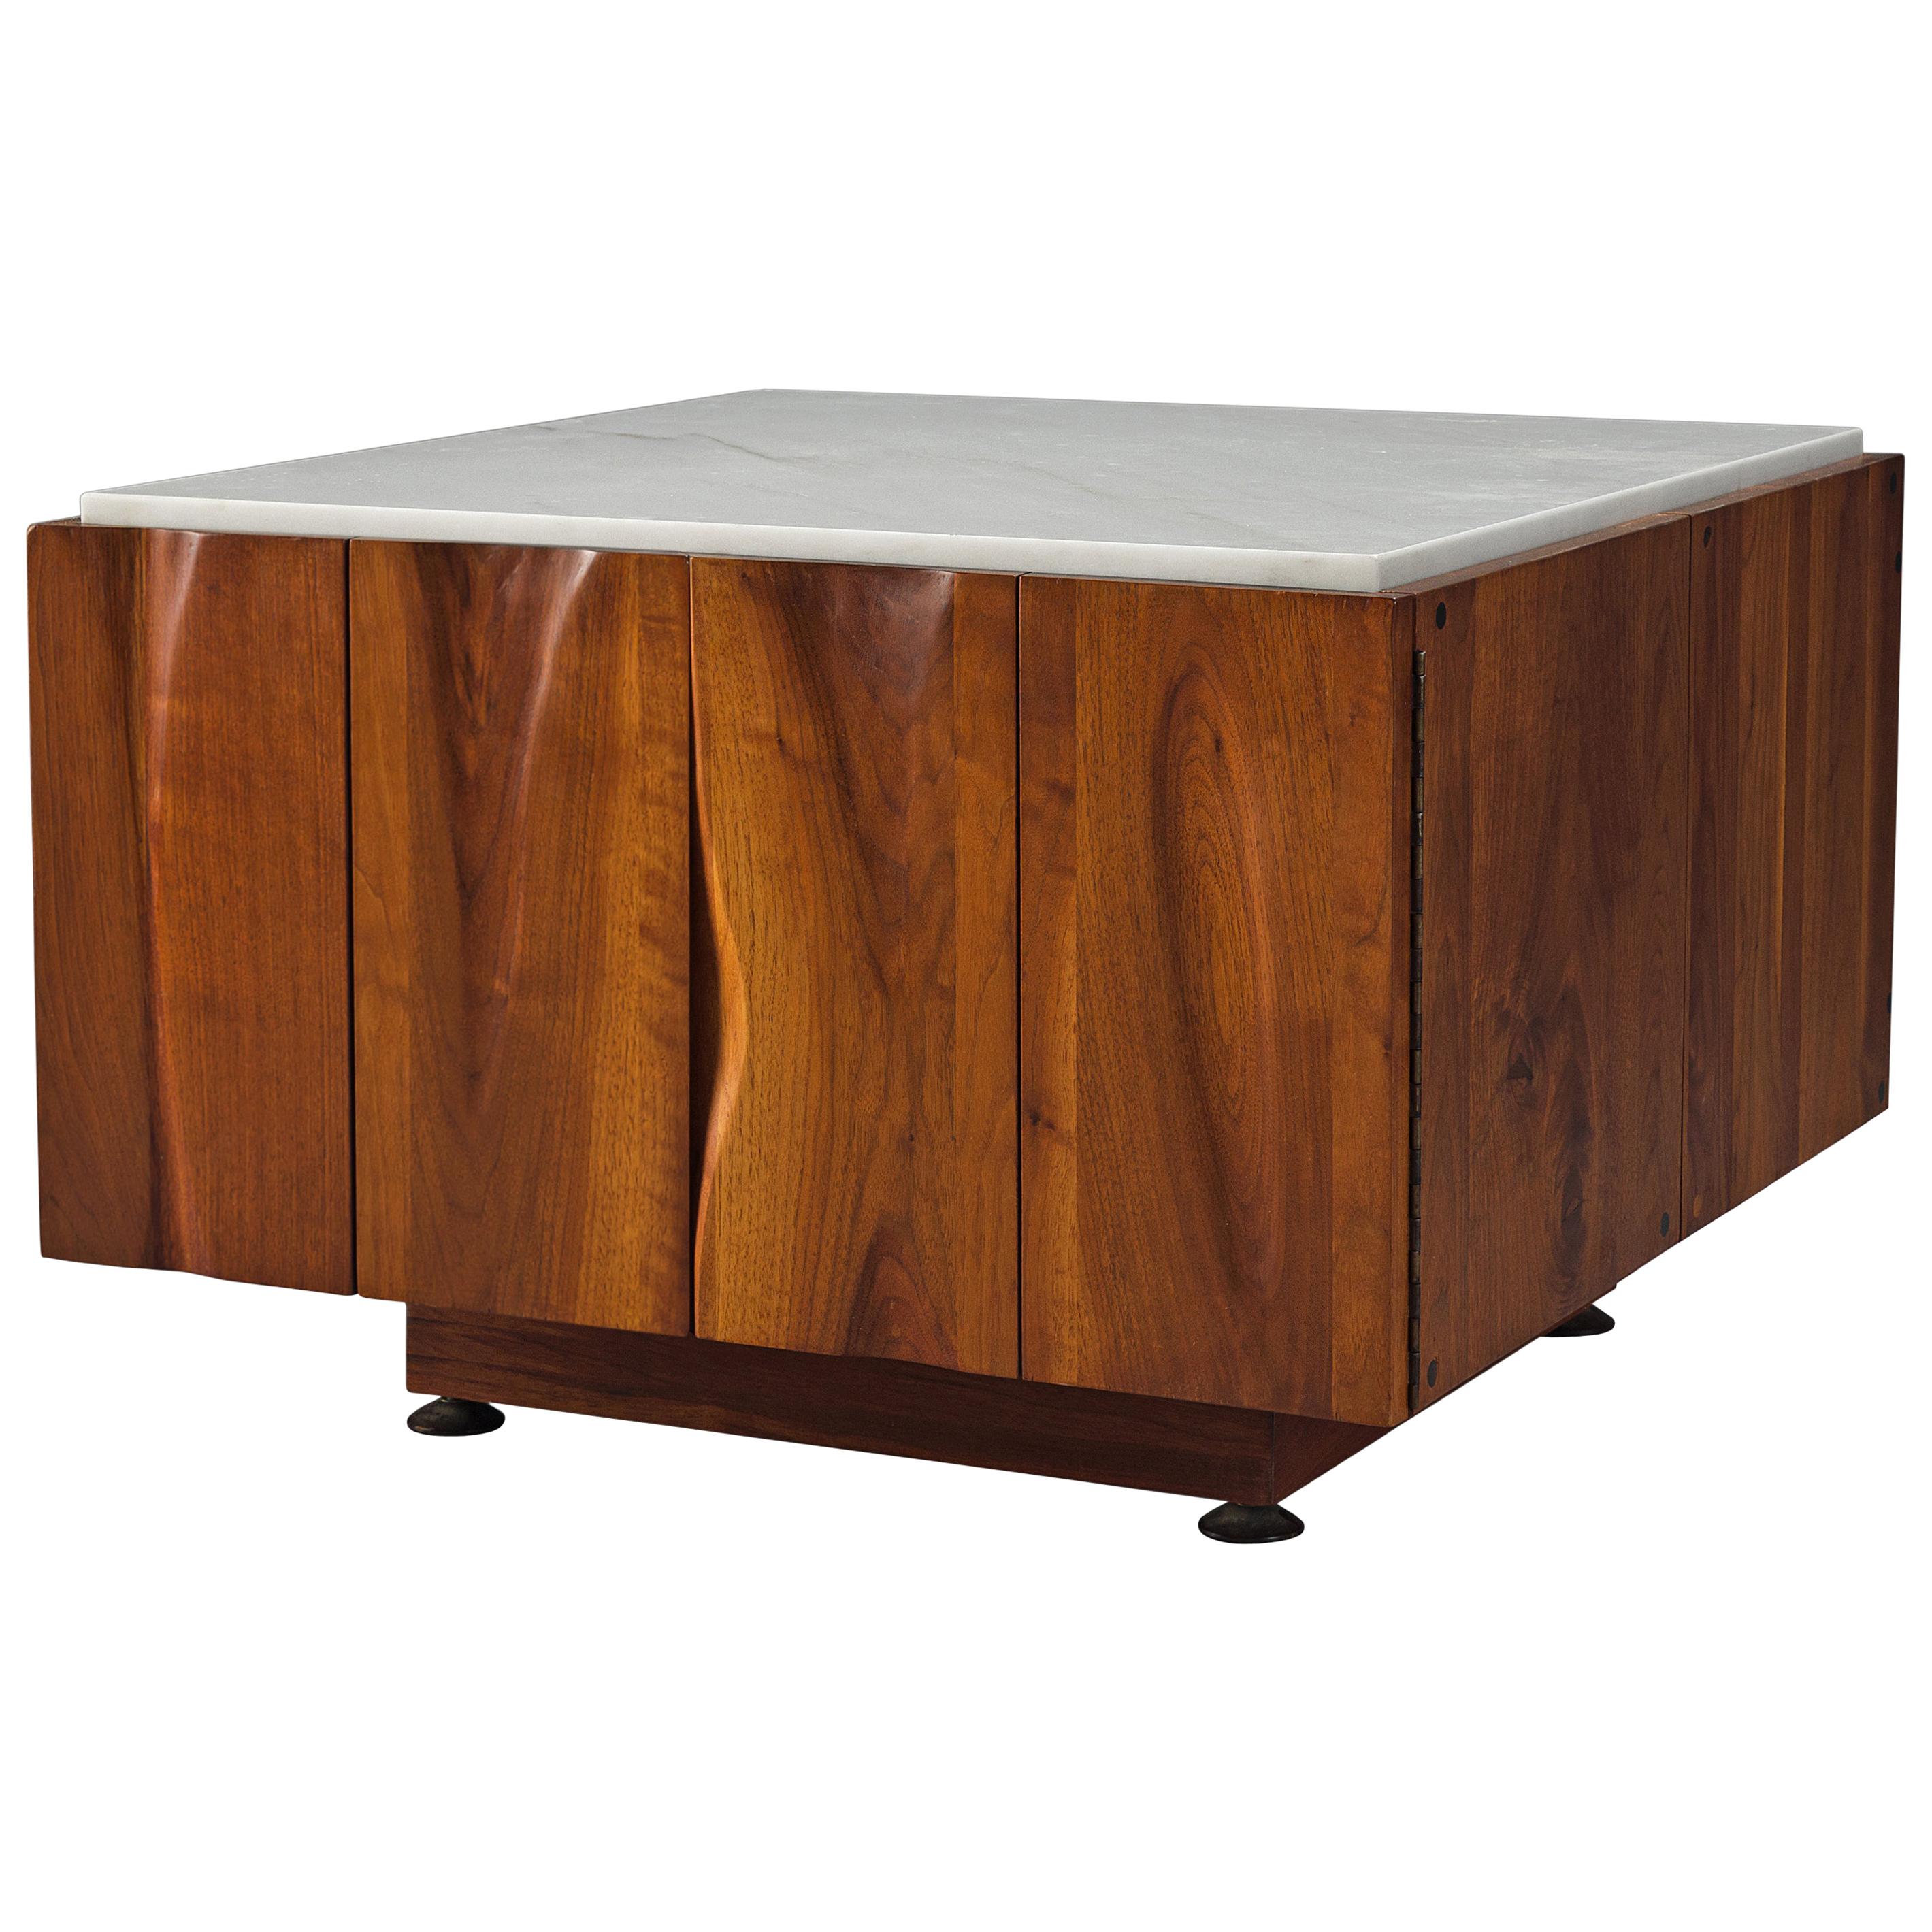 Phillip Lloyd Powell Coffee Table in Walnut and Marble with Hidden Storage